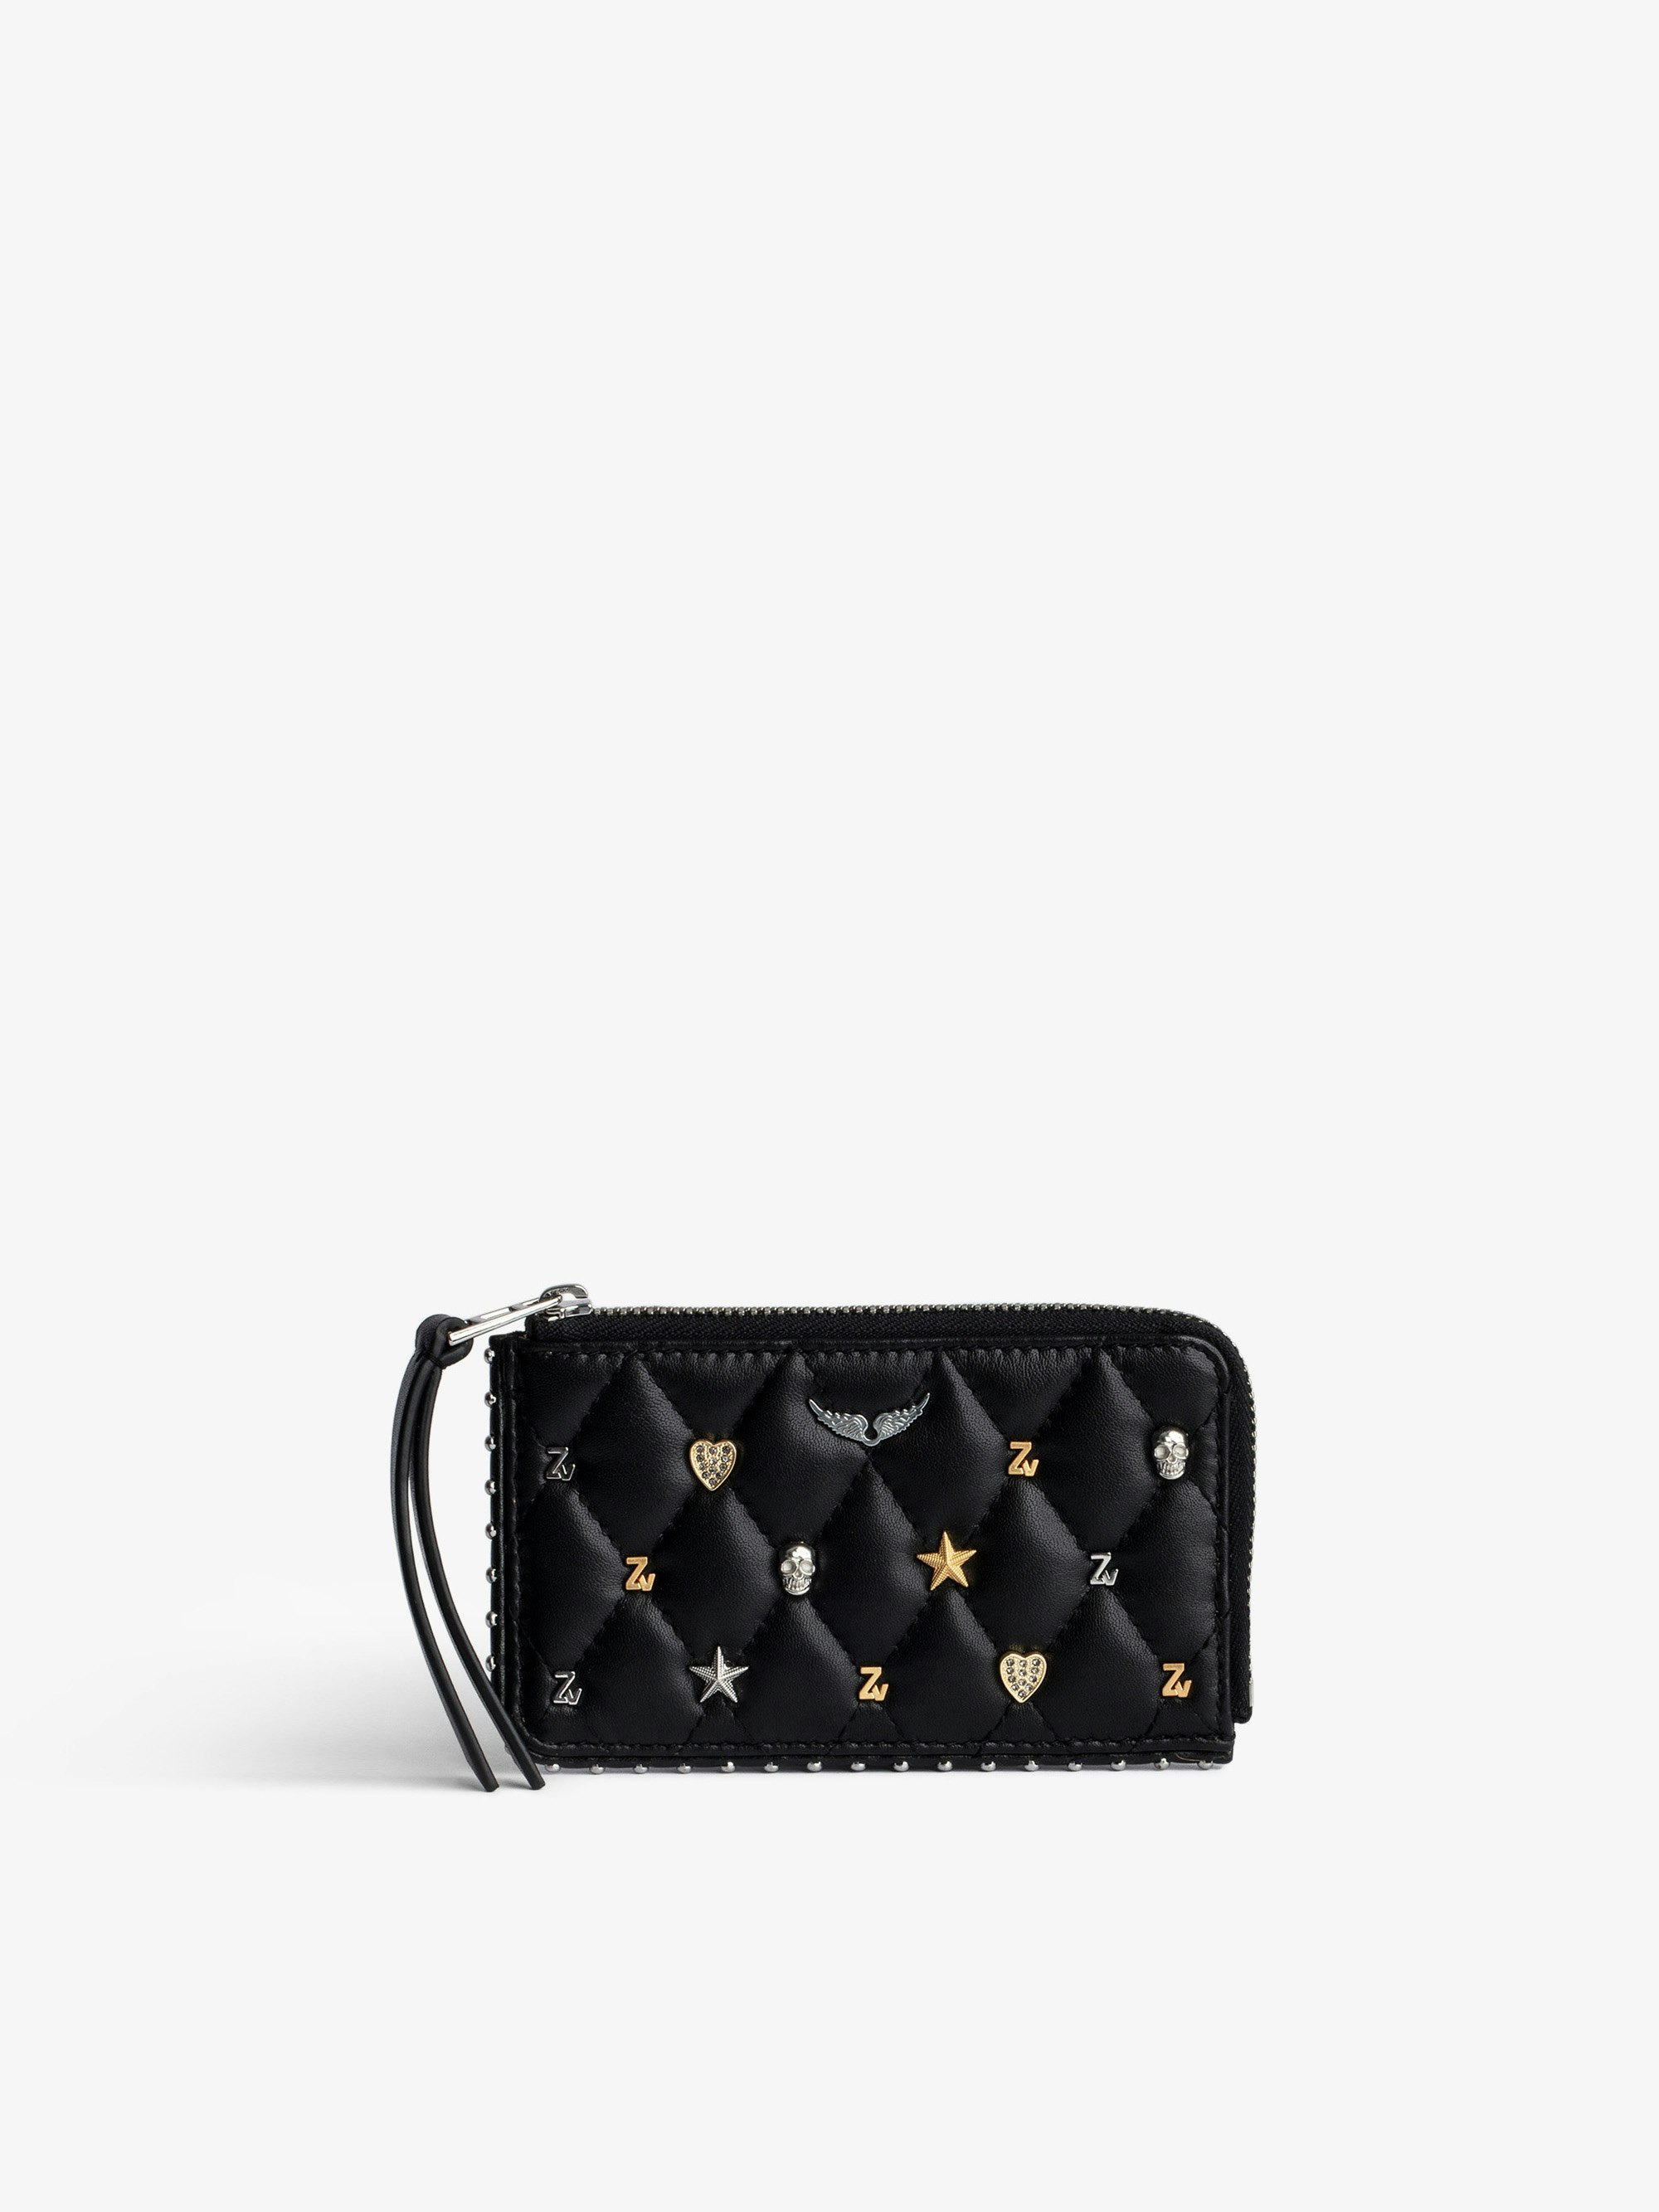 ZV Card Card Holder - Women’s black quilted leather zipped card holder with silver- and gold-tone charms.